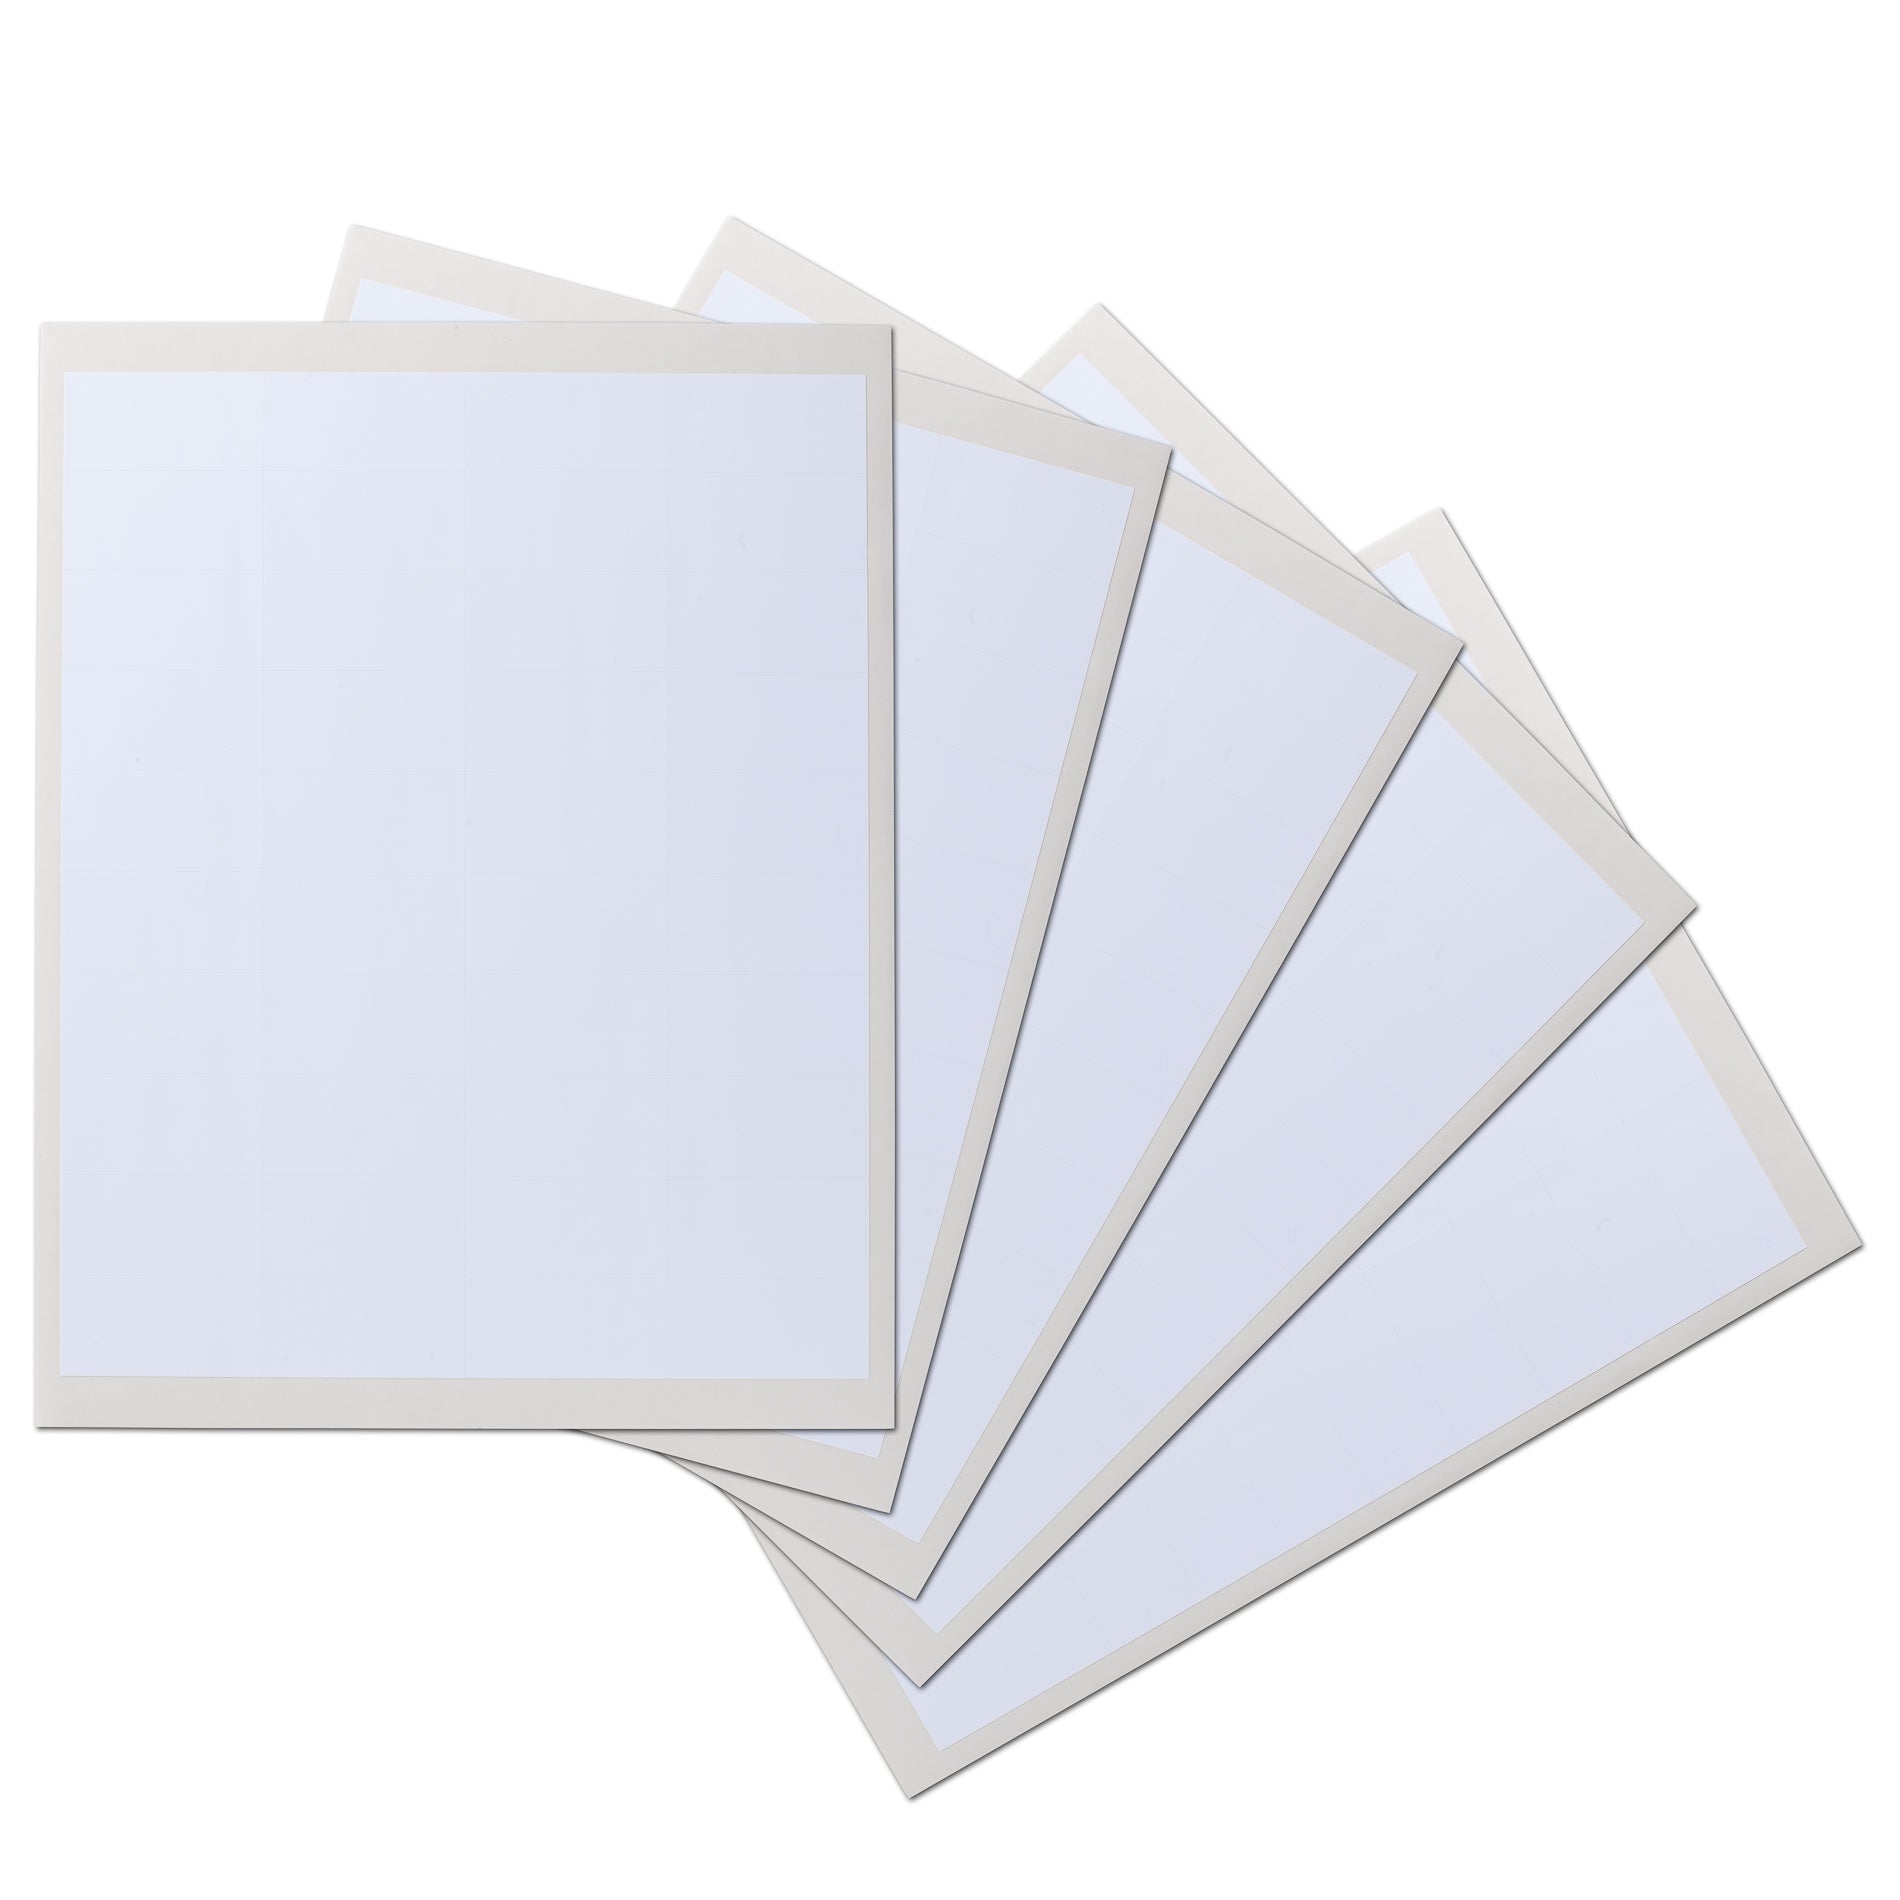 2 x1 inch Rectangle Waterproof Labels